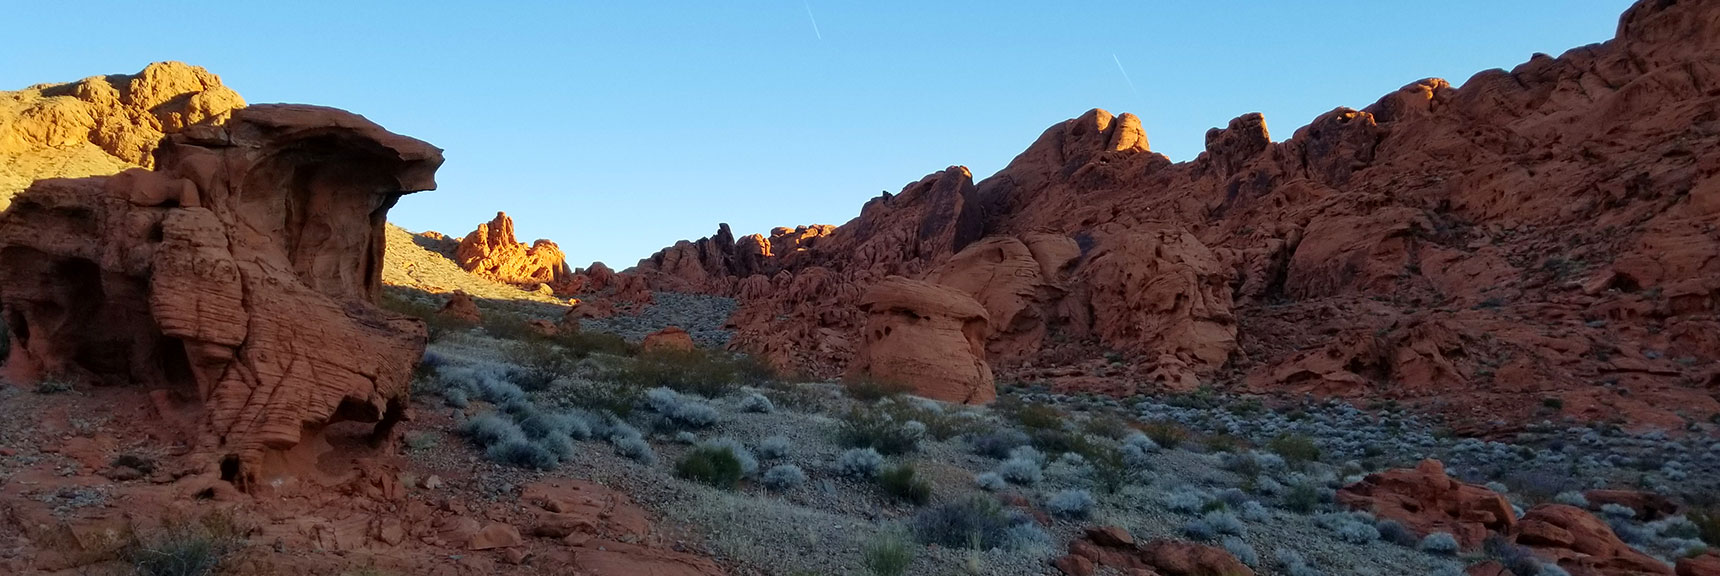 Ascending Through the Pass on Prospect Trail in Valley of Fire State Park, Nevada